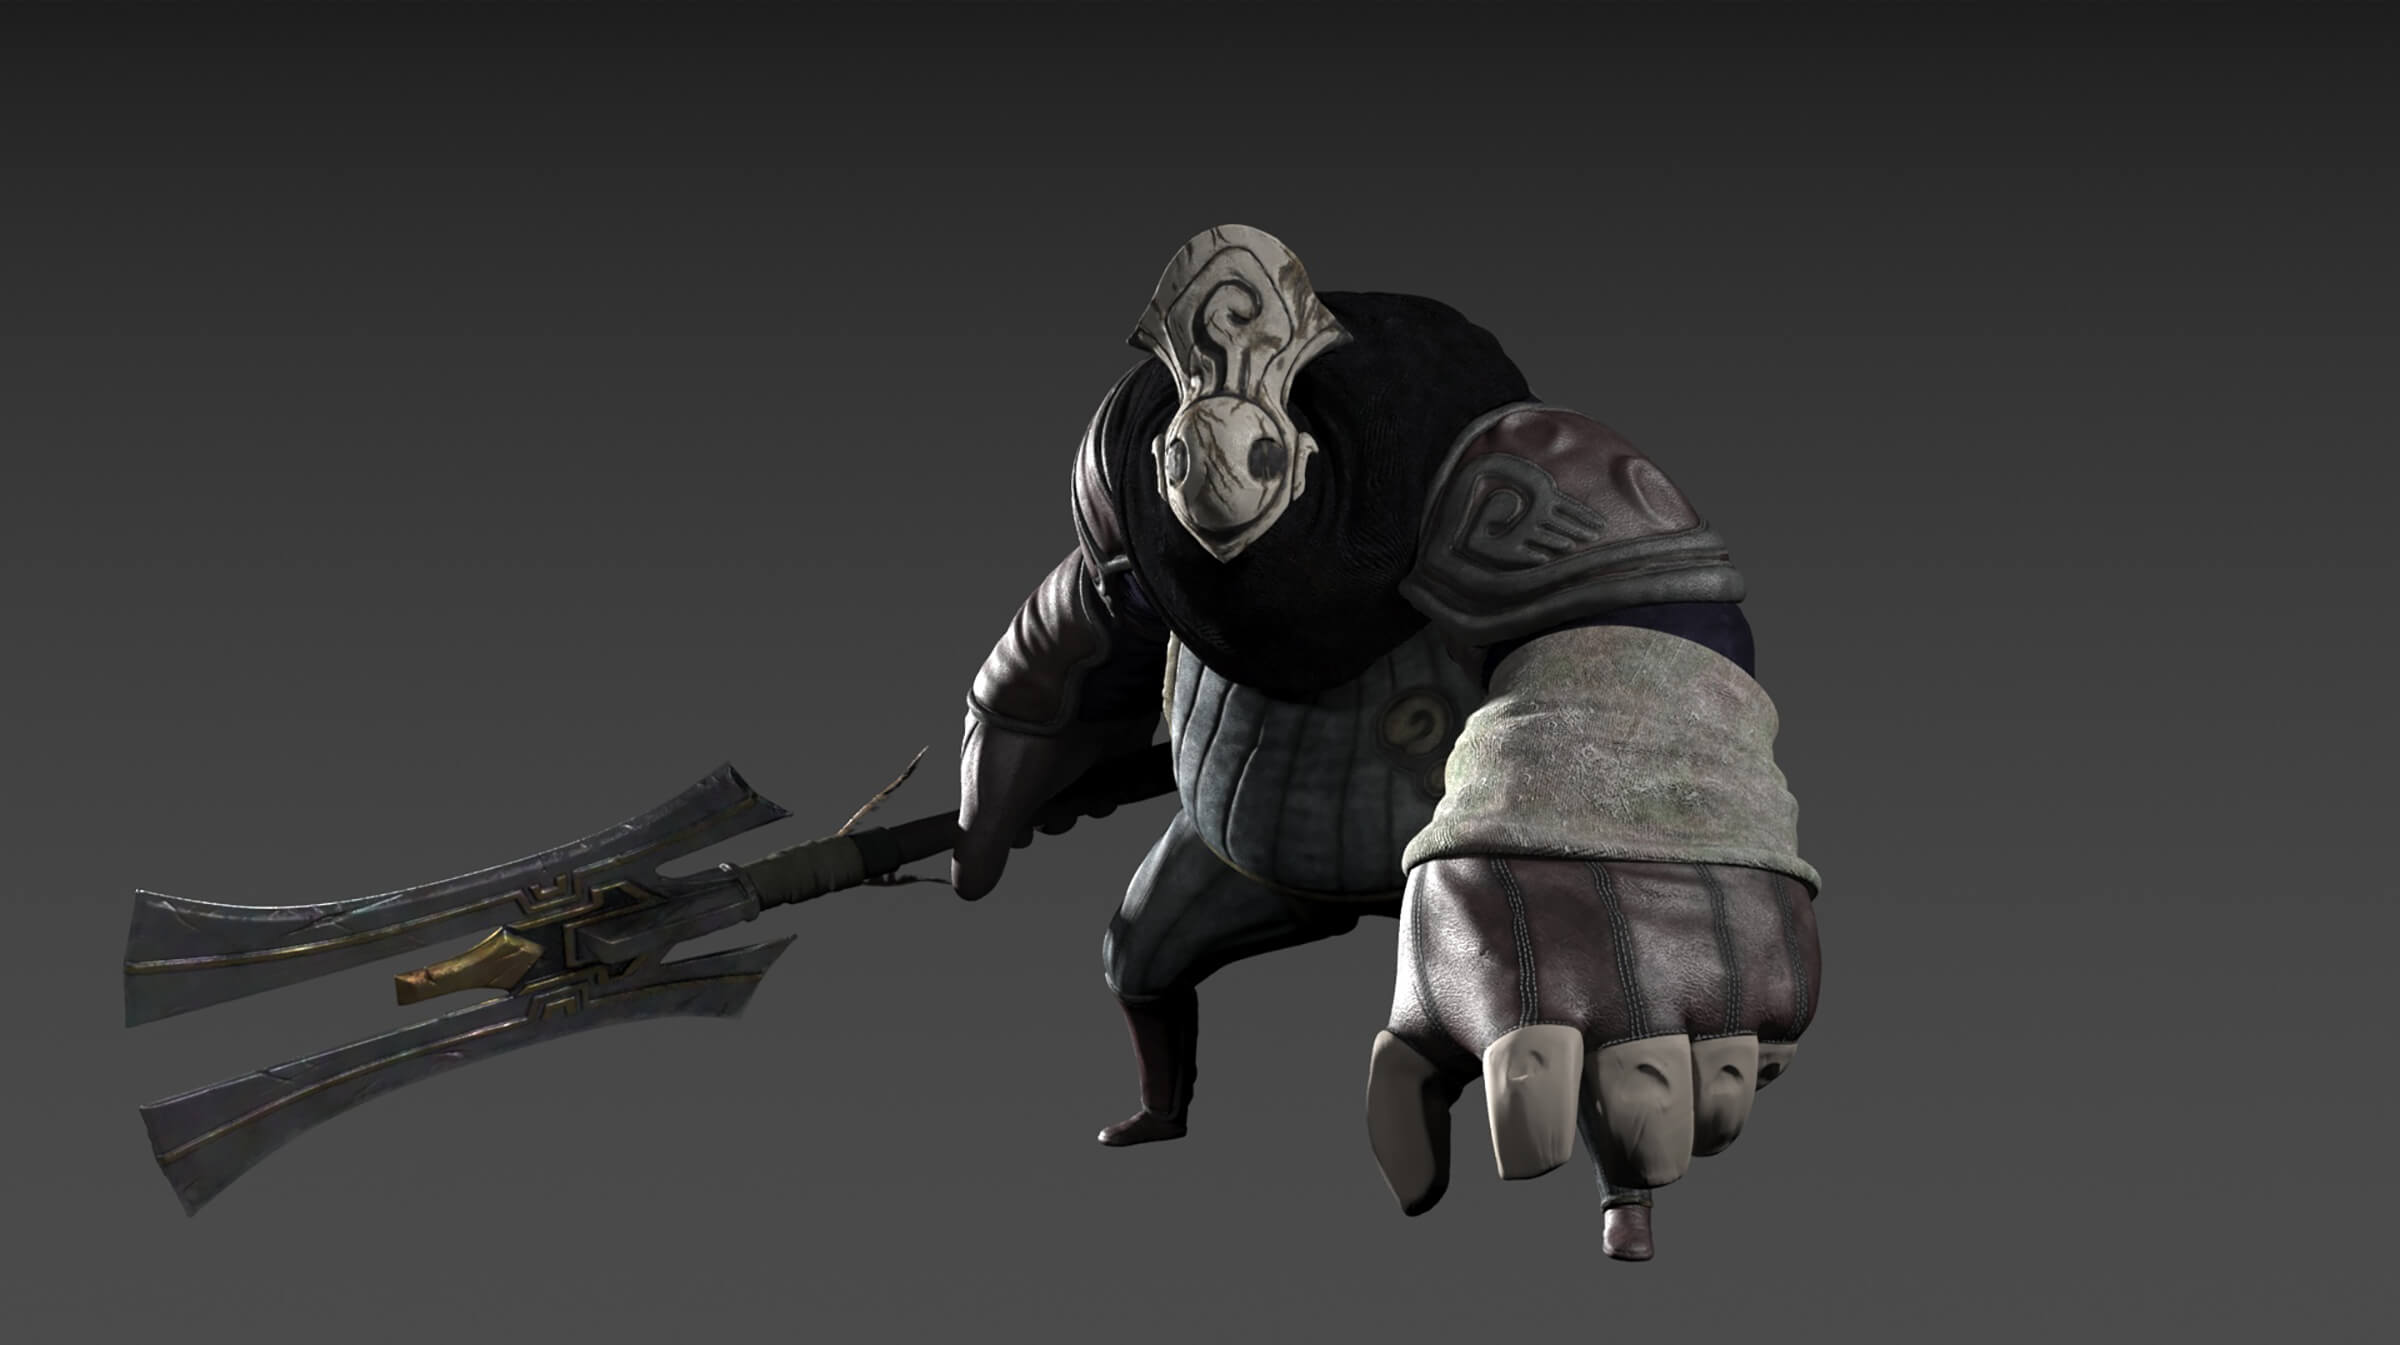 A stocky CG character in cloth battle gear and weathered gray mask holds a large, two-pronged melee weapon at its side.